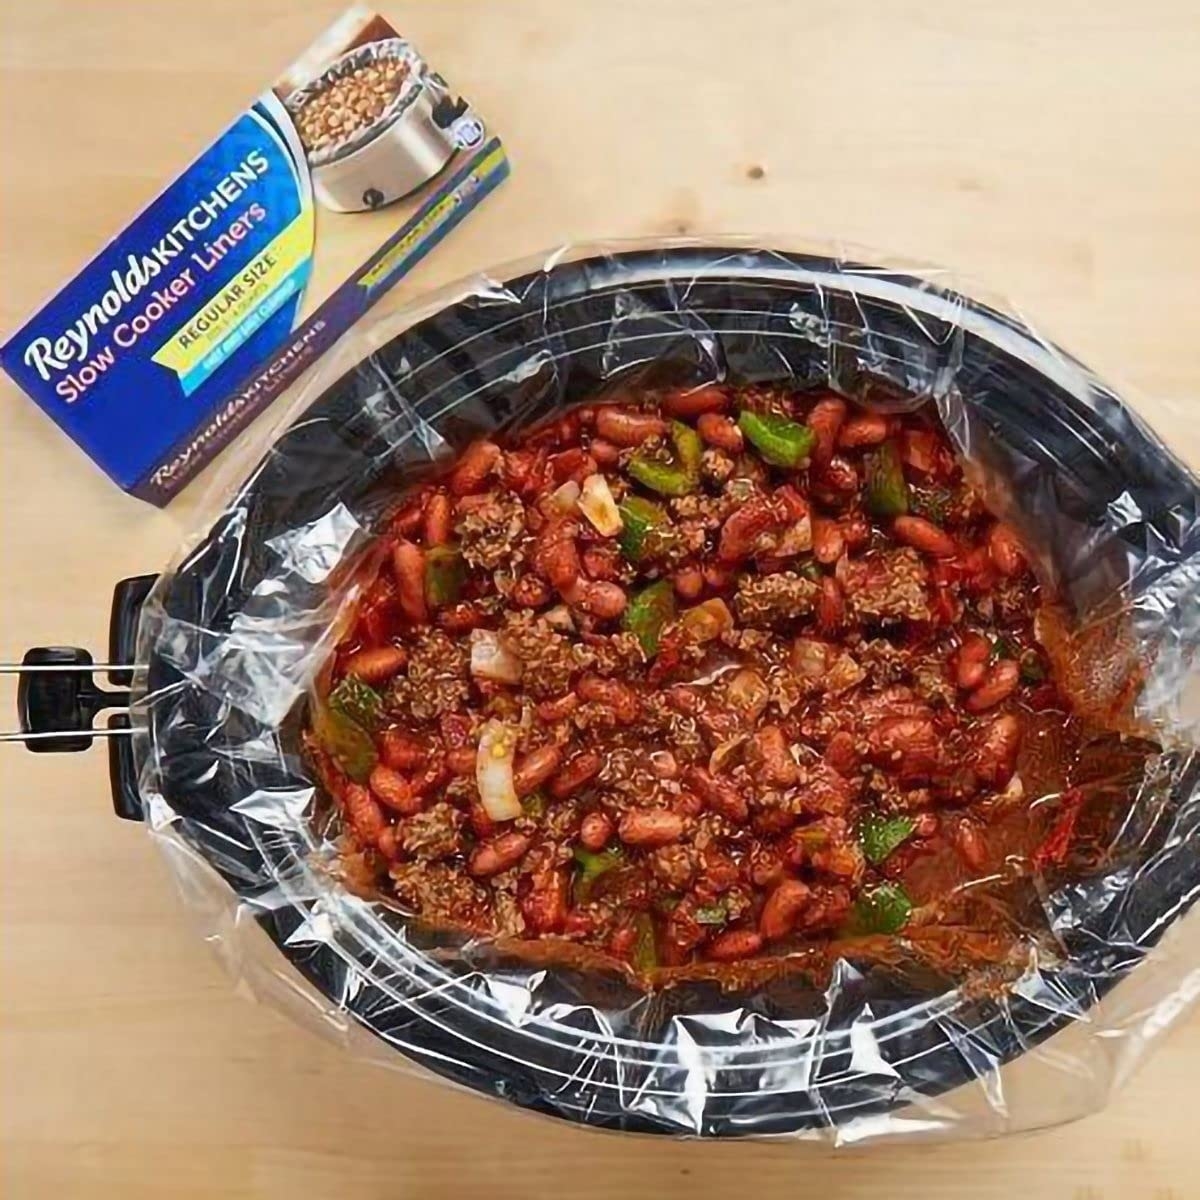 A slow cooker filled with chili, lined with a Reynolds Kitchens Slow Cooker Liner for easy cleanup